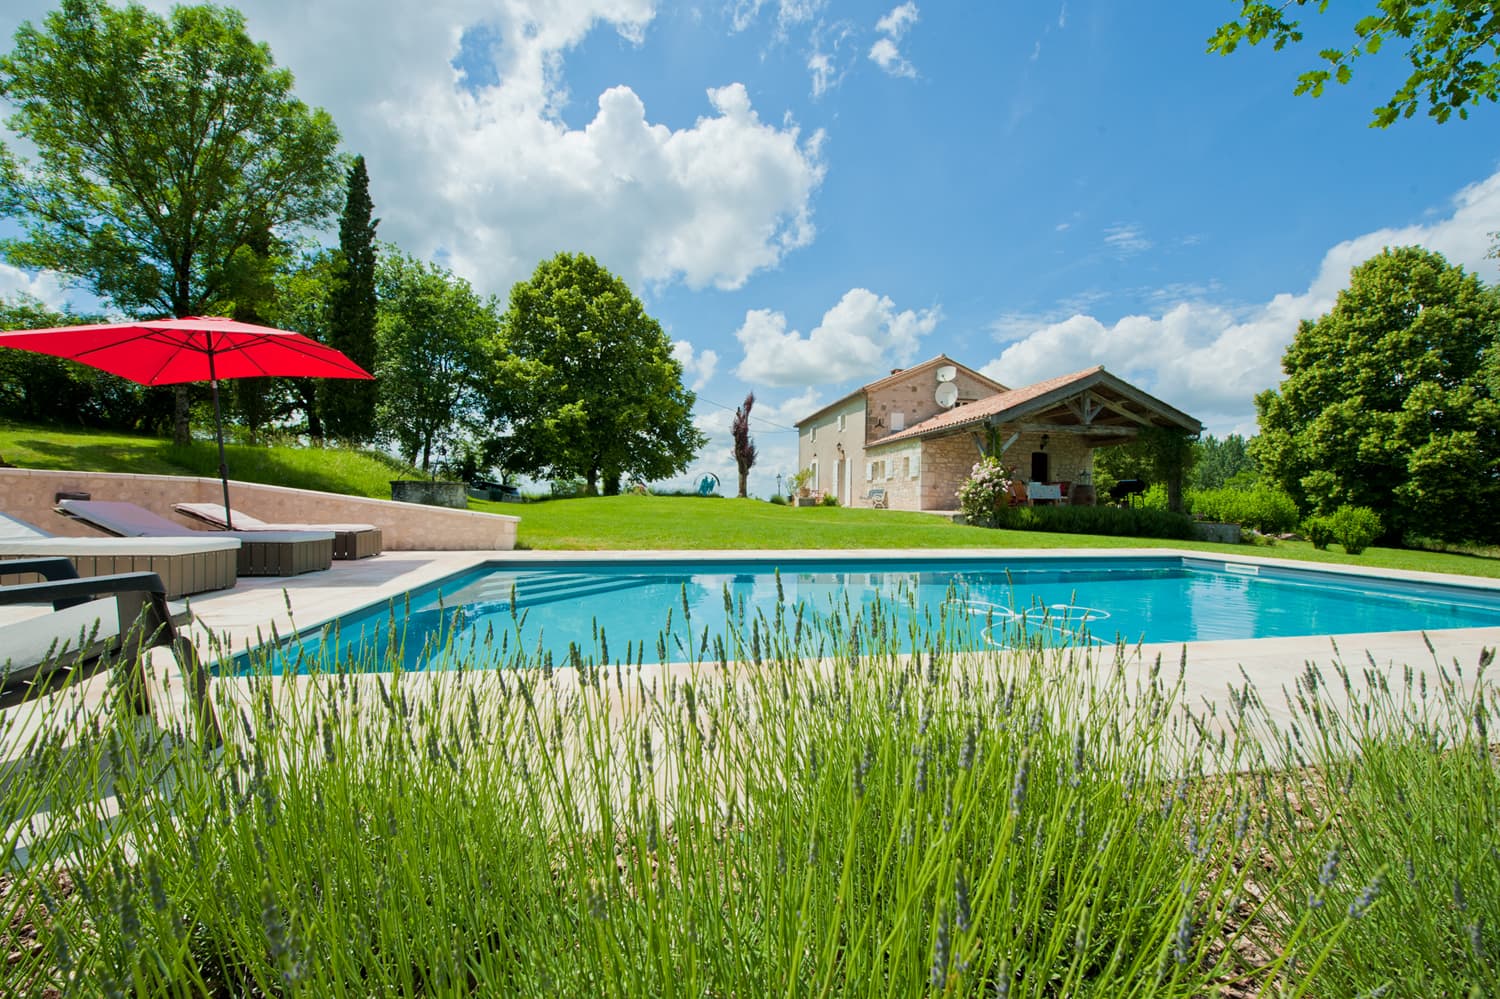 Advertise Your Self Catering Holiday Rental Home In France